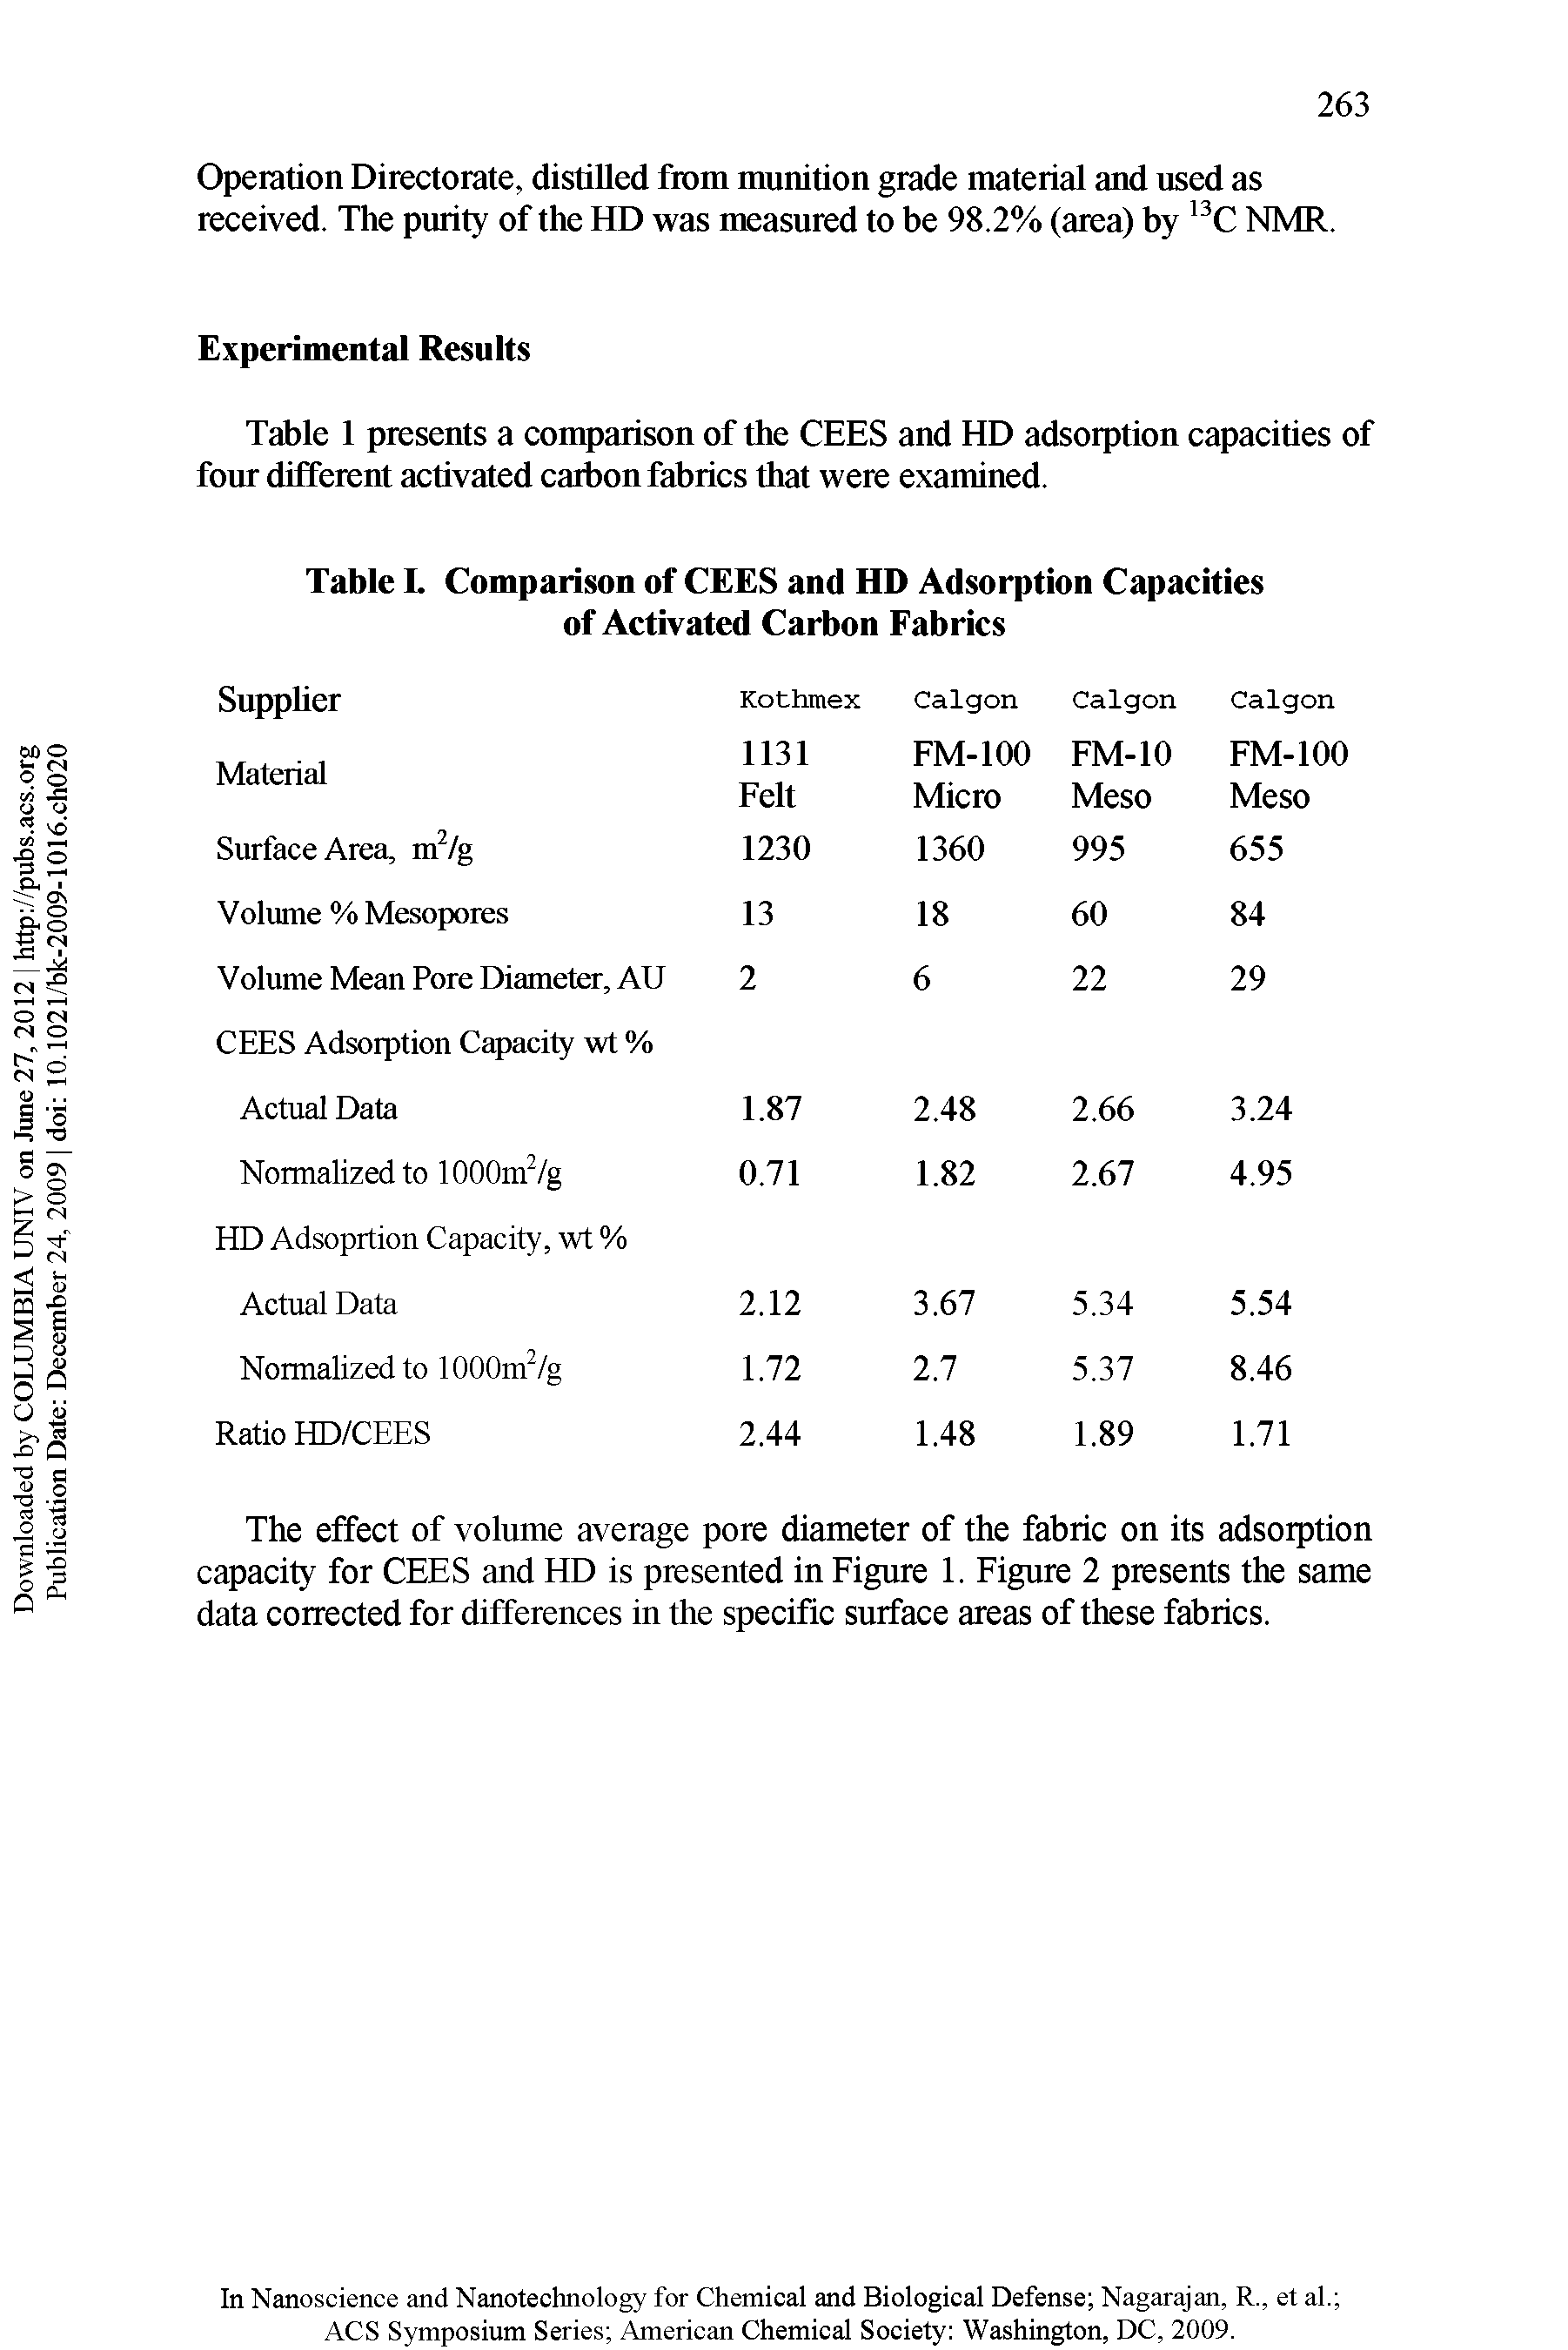 Table L Comparison of CEES and HD Adsorption Capacities of Activated Carbon Fabrics...